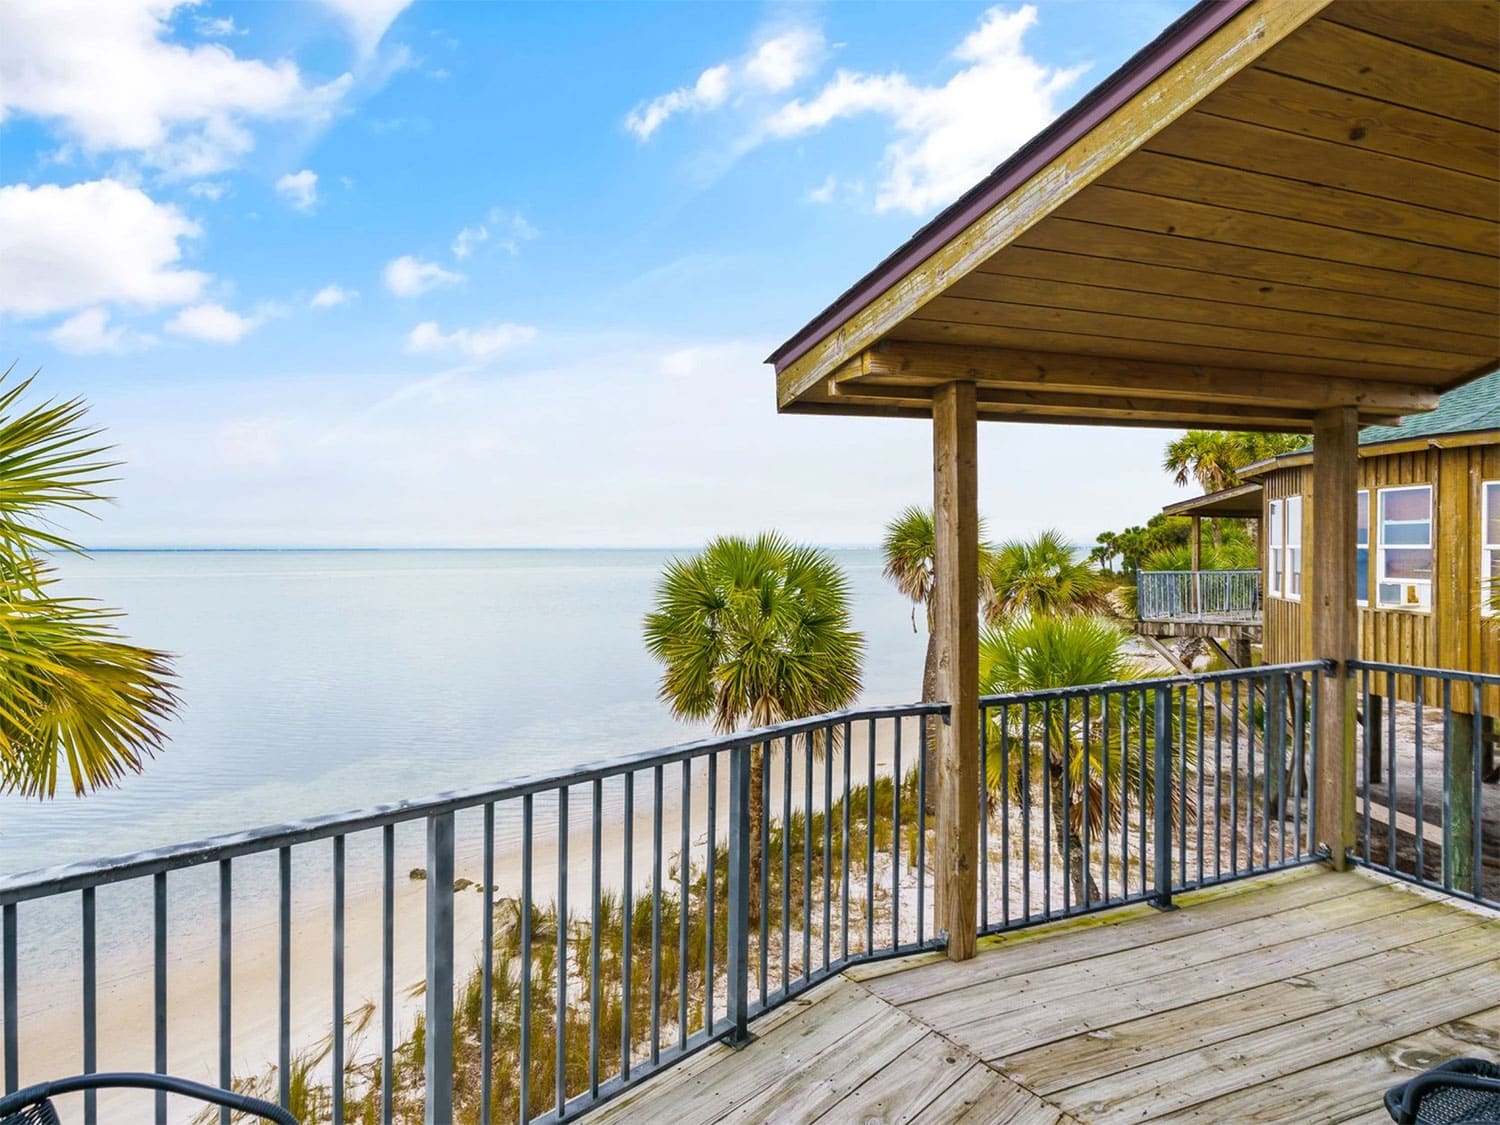 The view from the terrace of a beachside bungalow on Black’s Island in Florida.